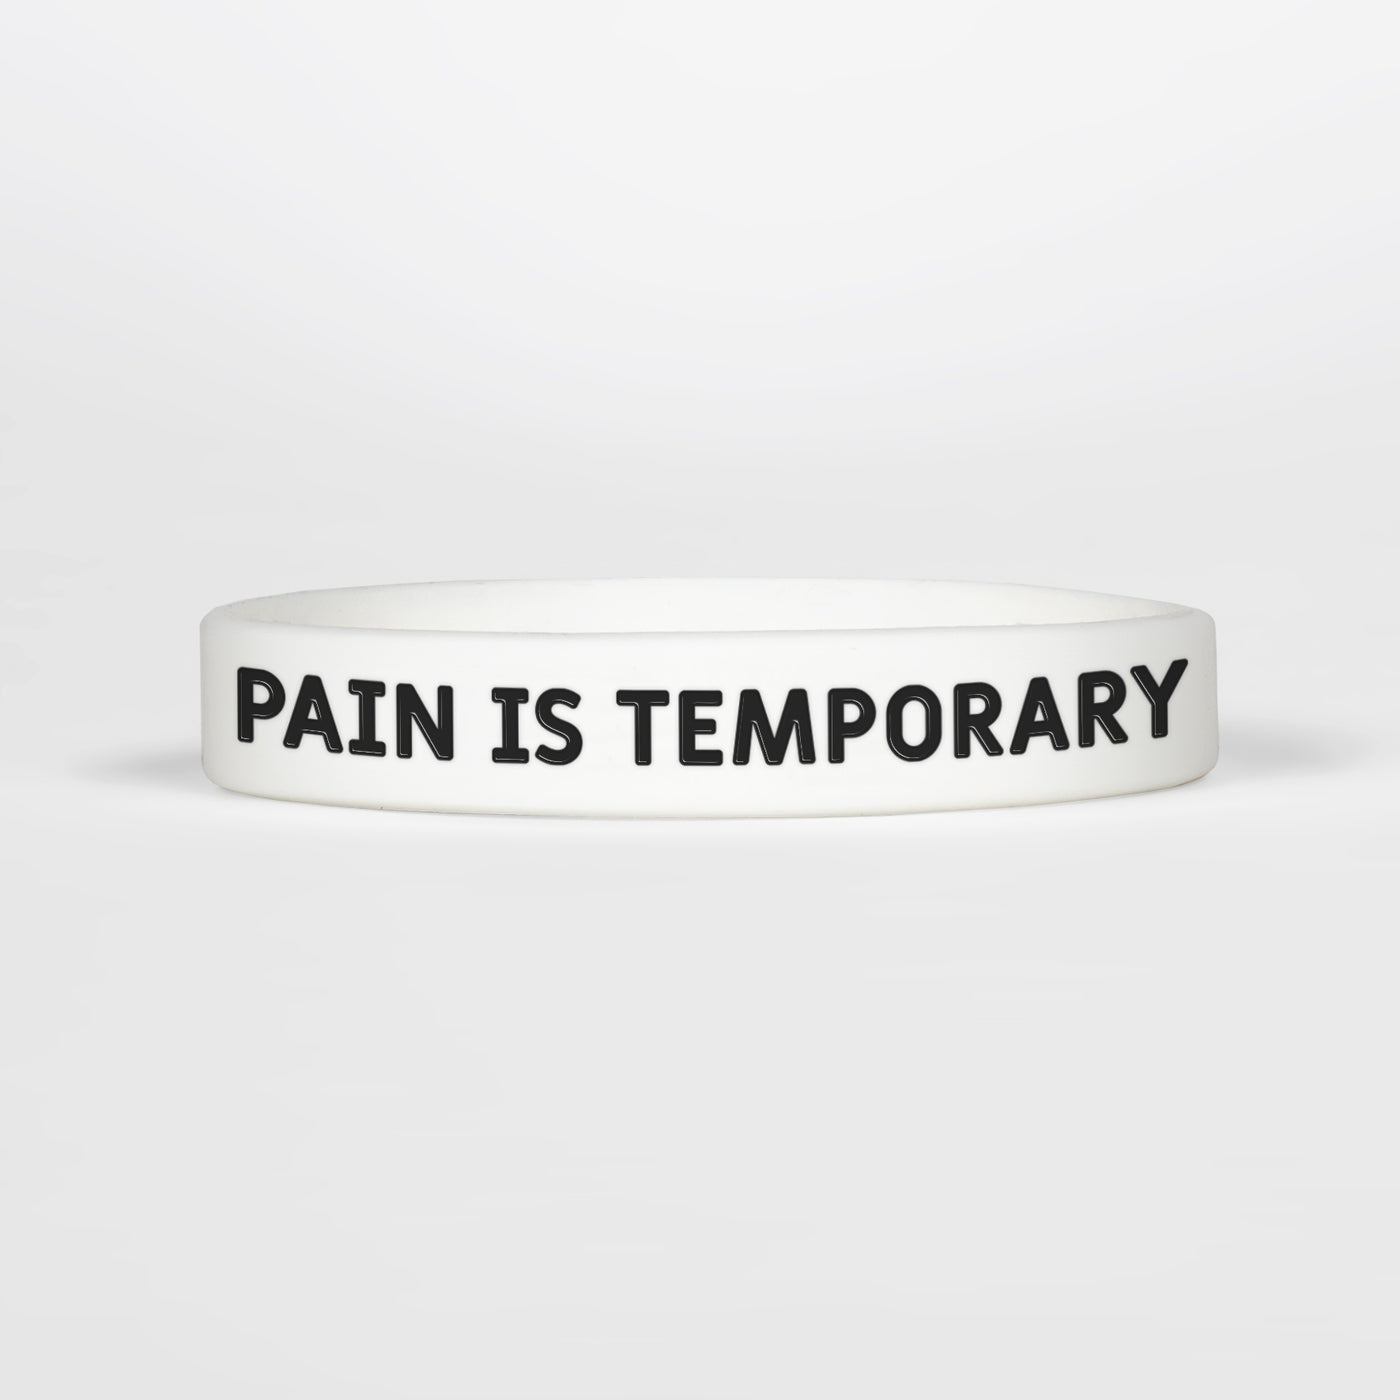 Pain Is Temporary Motivational Wristband